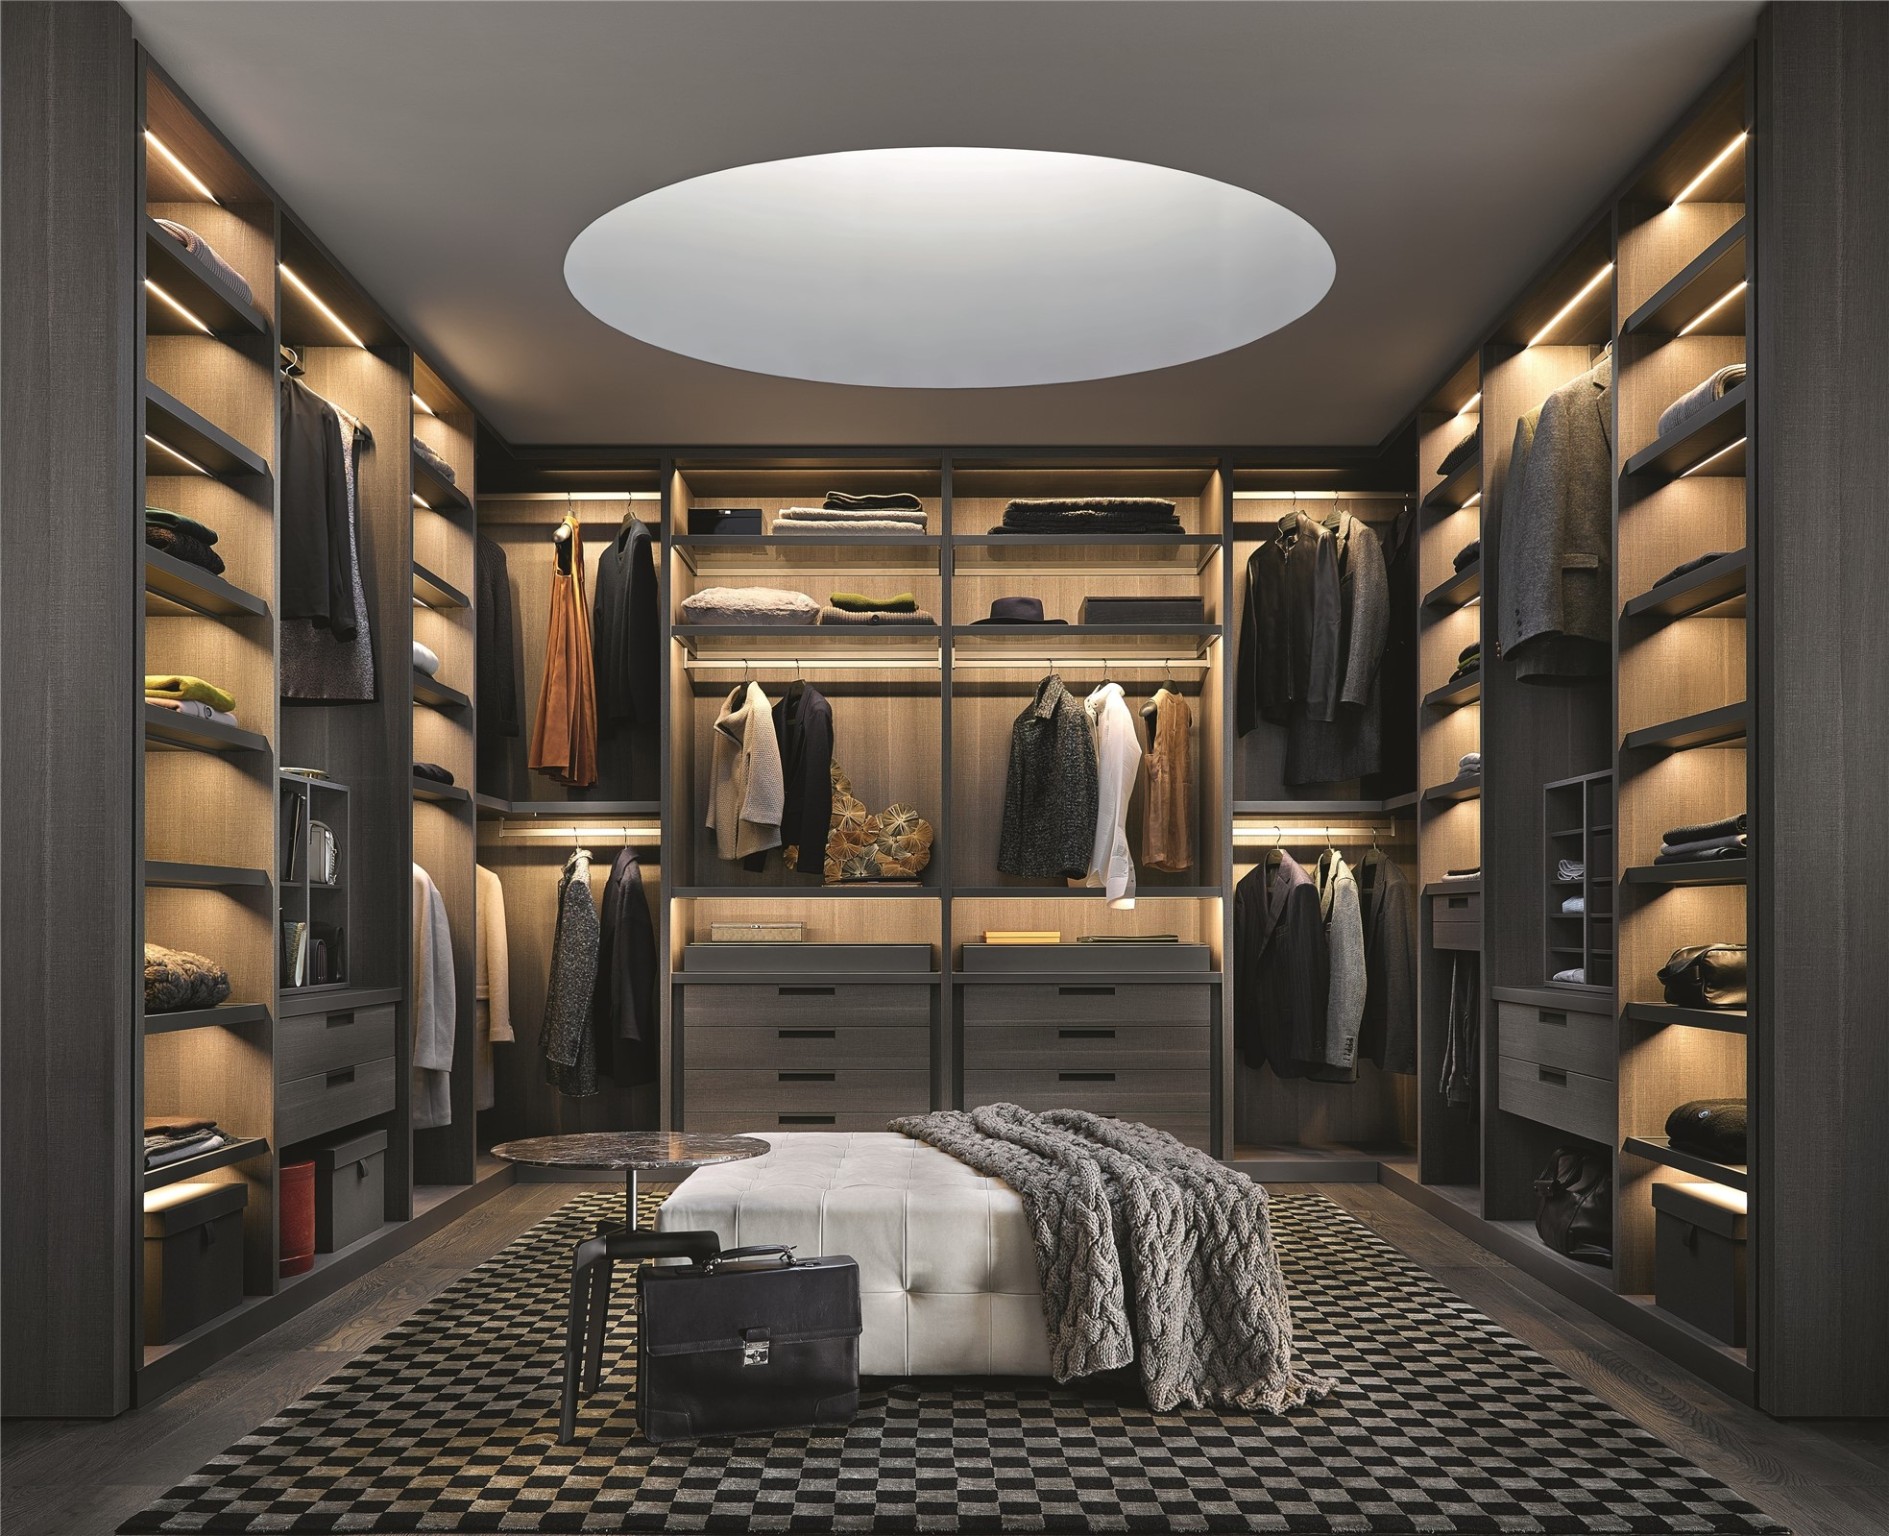 Extra-large primary closets can be completely customized and outfitted by highly-revered Poliform. Rendering shown is an example and may not be representative of this unit.